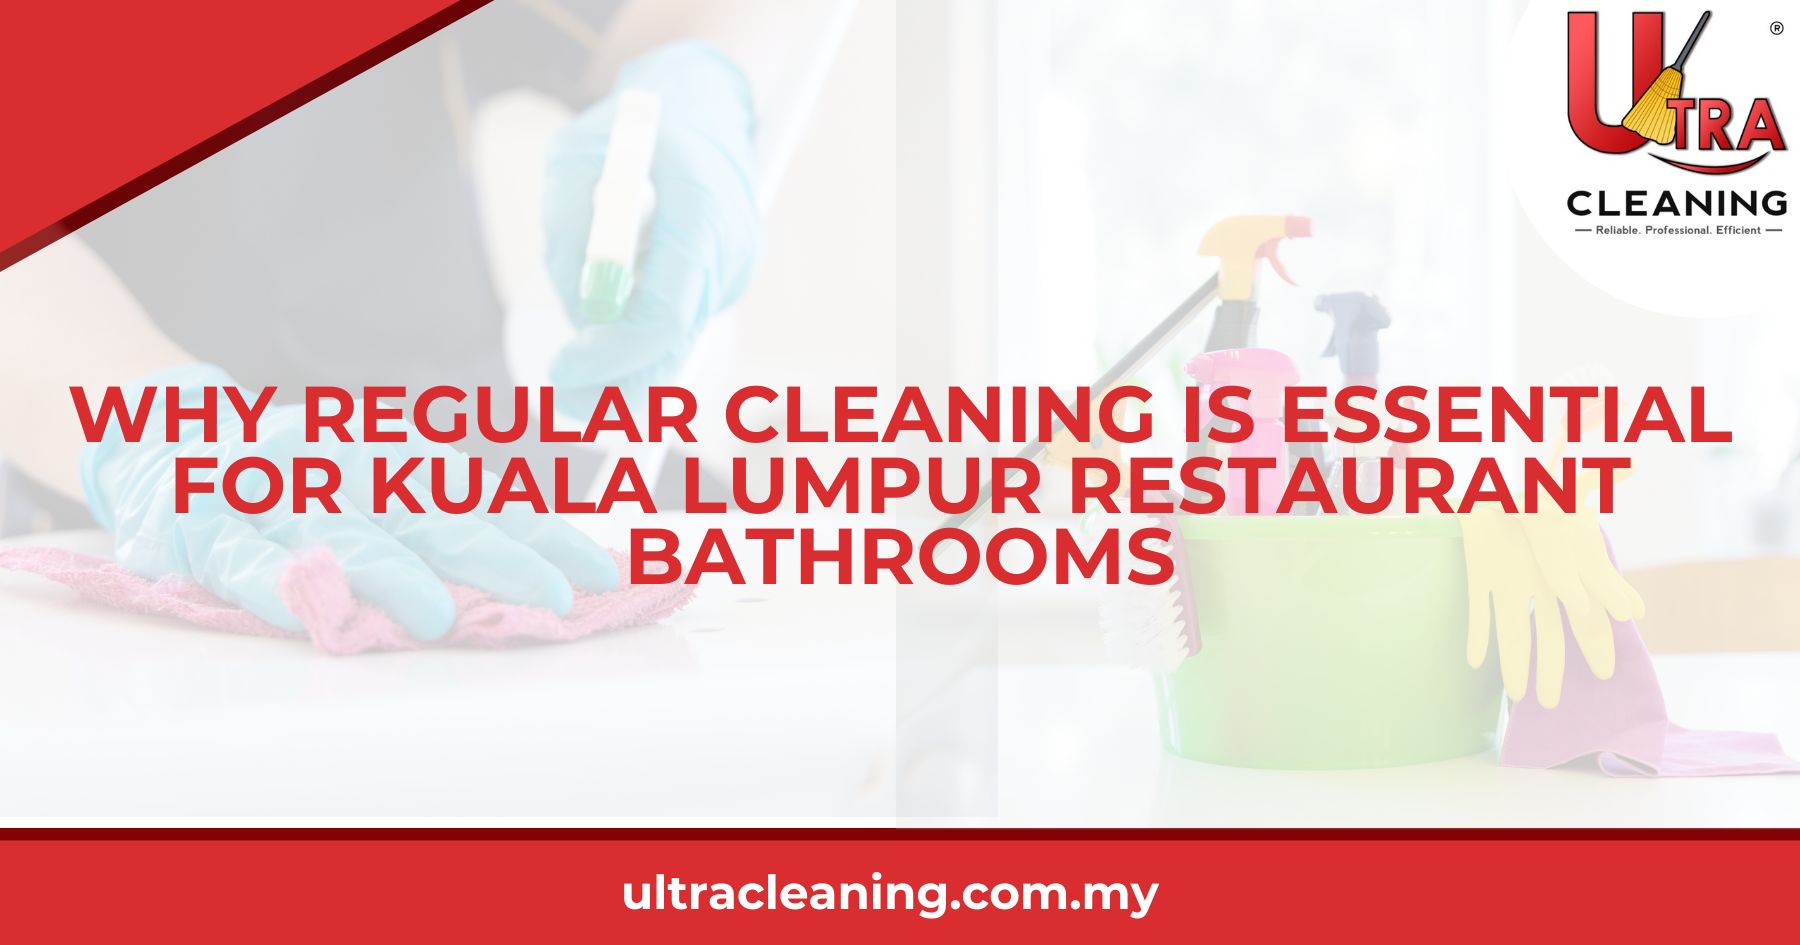 Why Regular Cleaning is Essential for Kuala Lumpur Restaurant Bathrooms